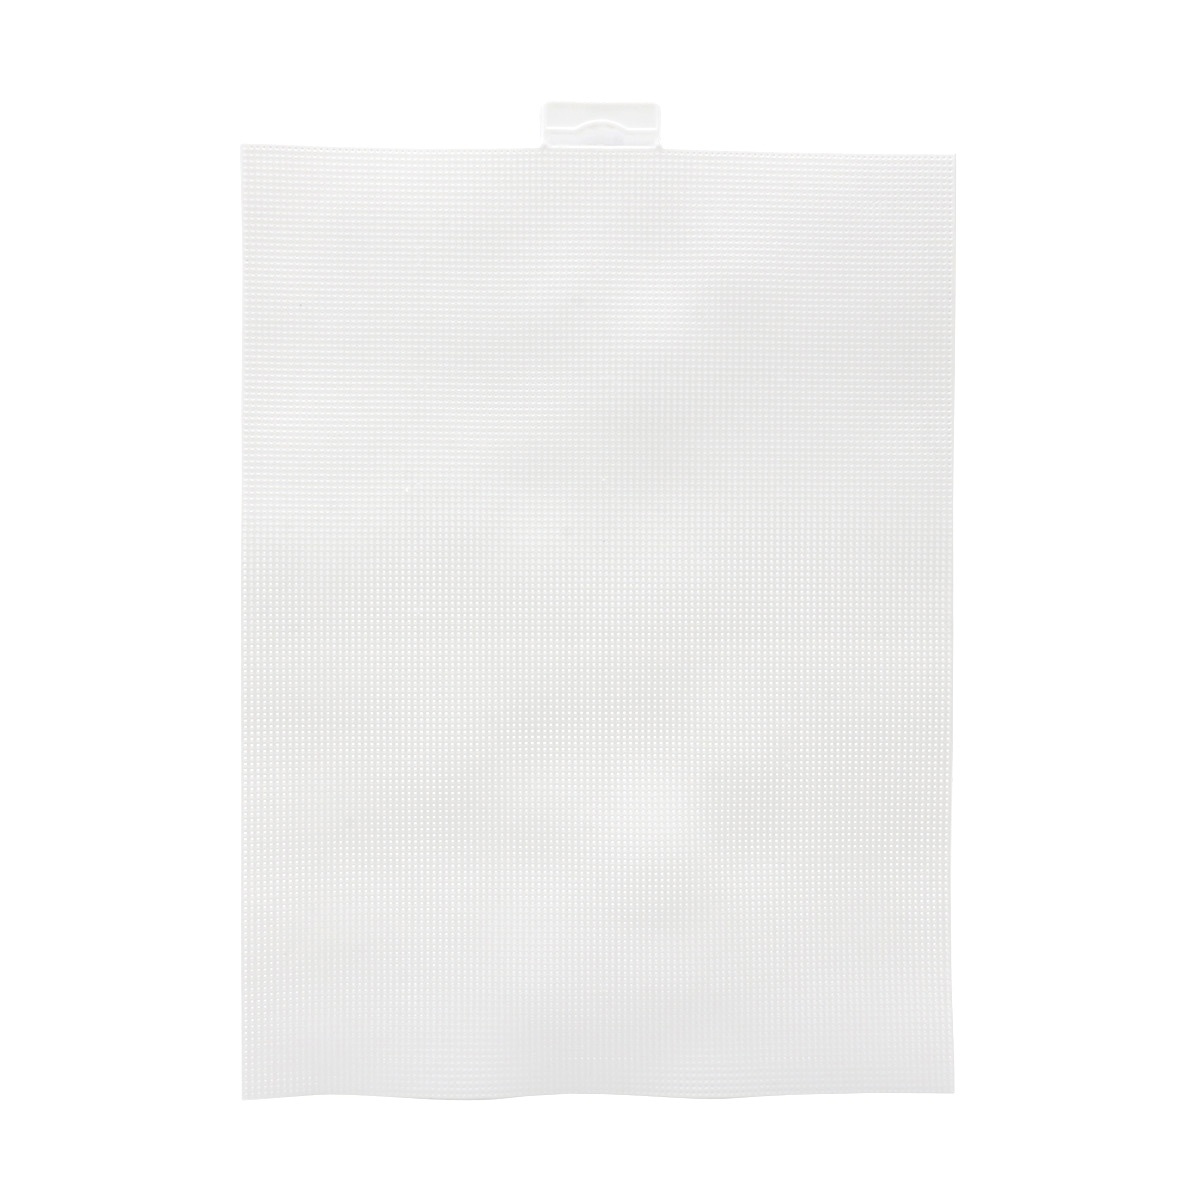 Plastic Sheet Canvas by MP Studia, White фото 1